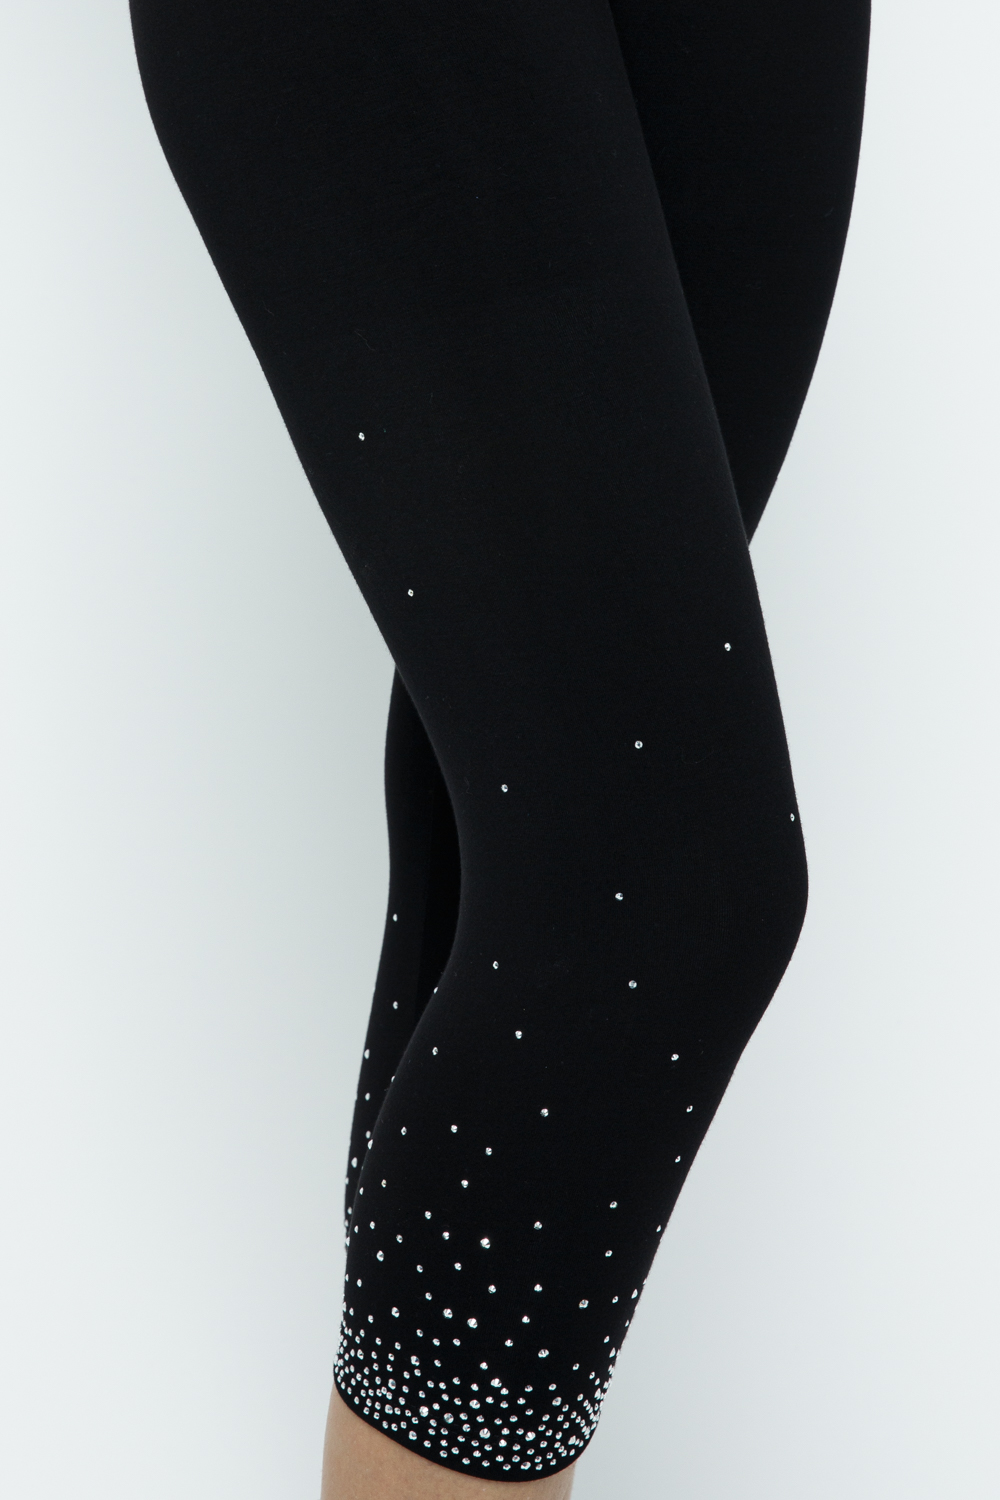 Buy Tipsy Elves Shiny Sequin Leggings for Women for Holiday Outfits and  Beyond, High Waisted Black Sequin (Black), X-Small at Amazon.in